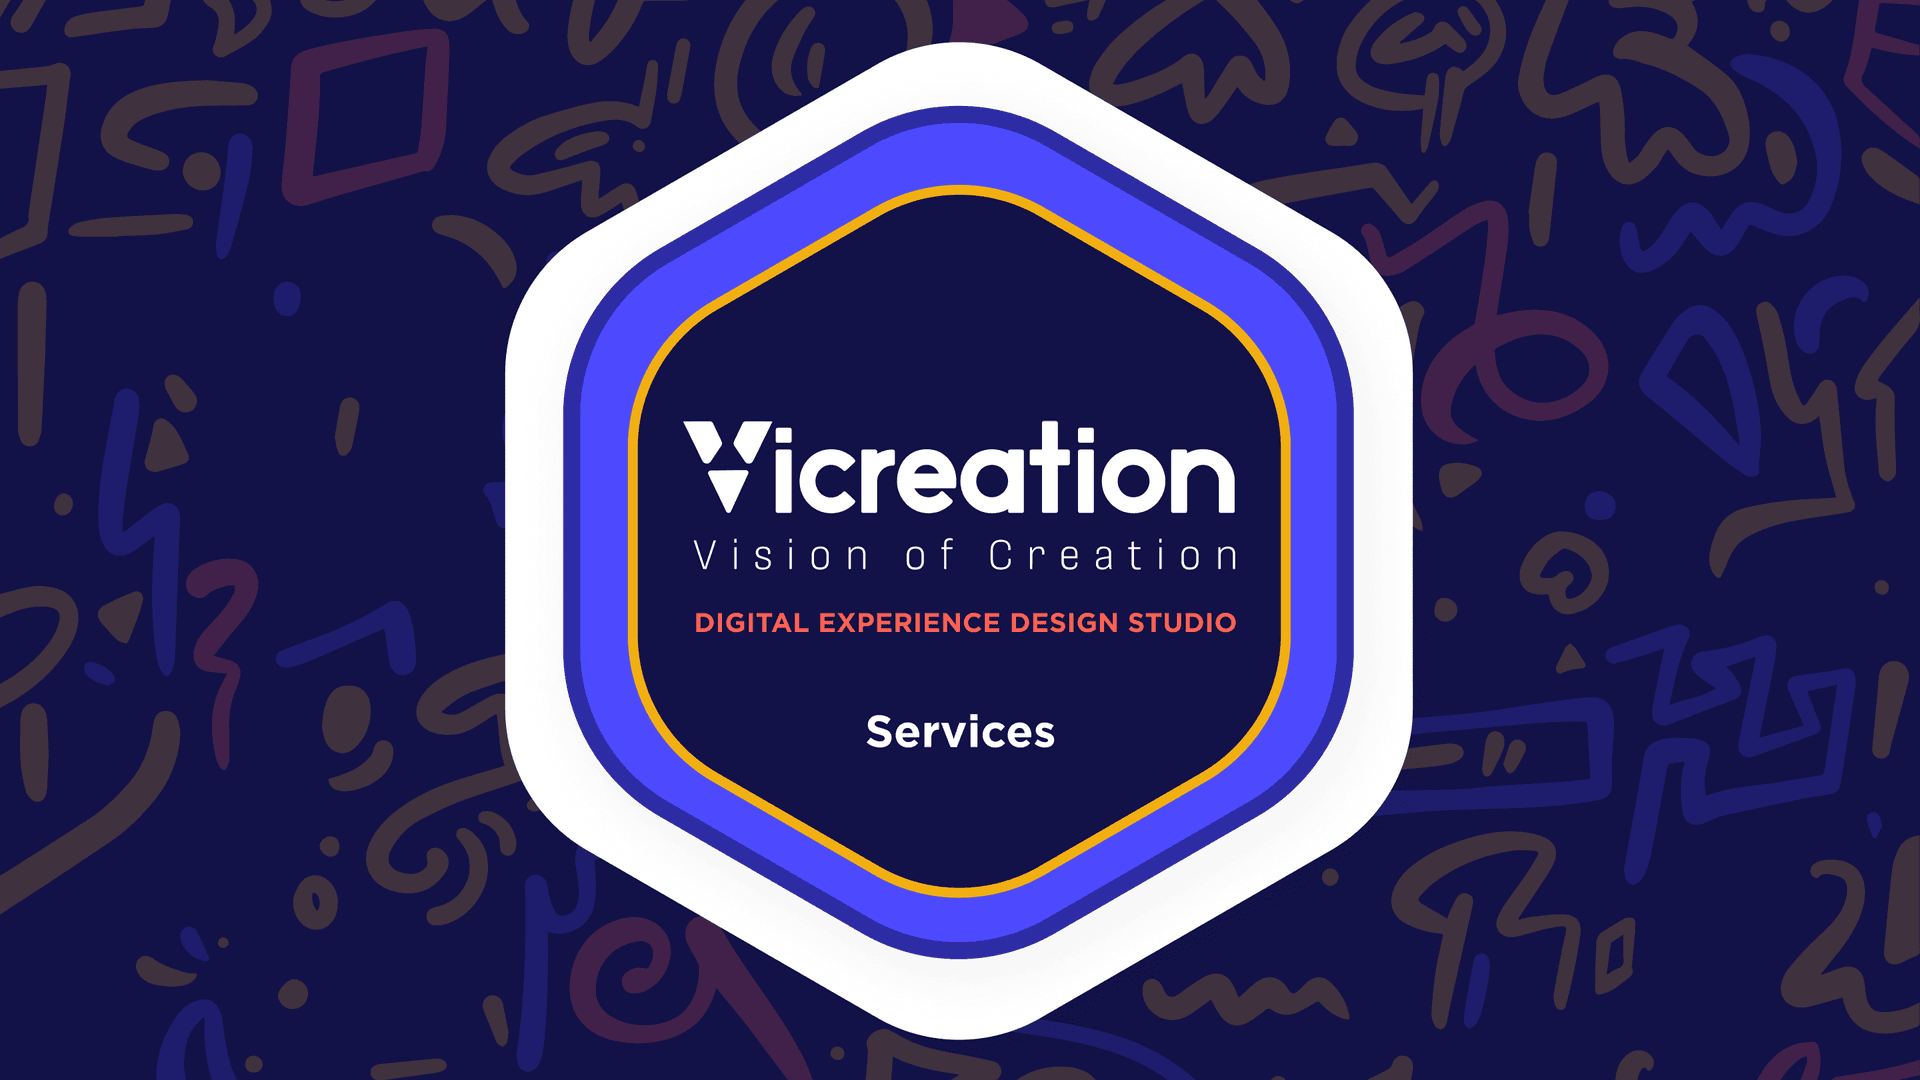 VicreationDES Services Document